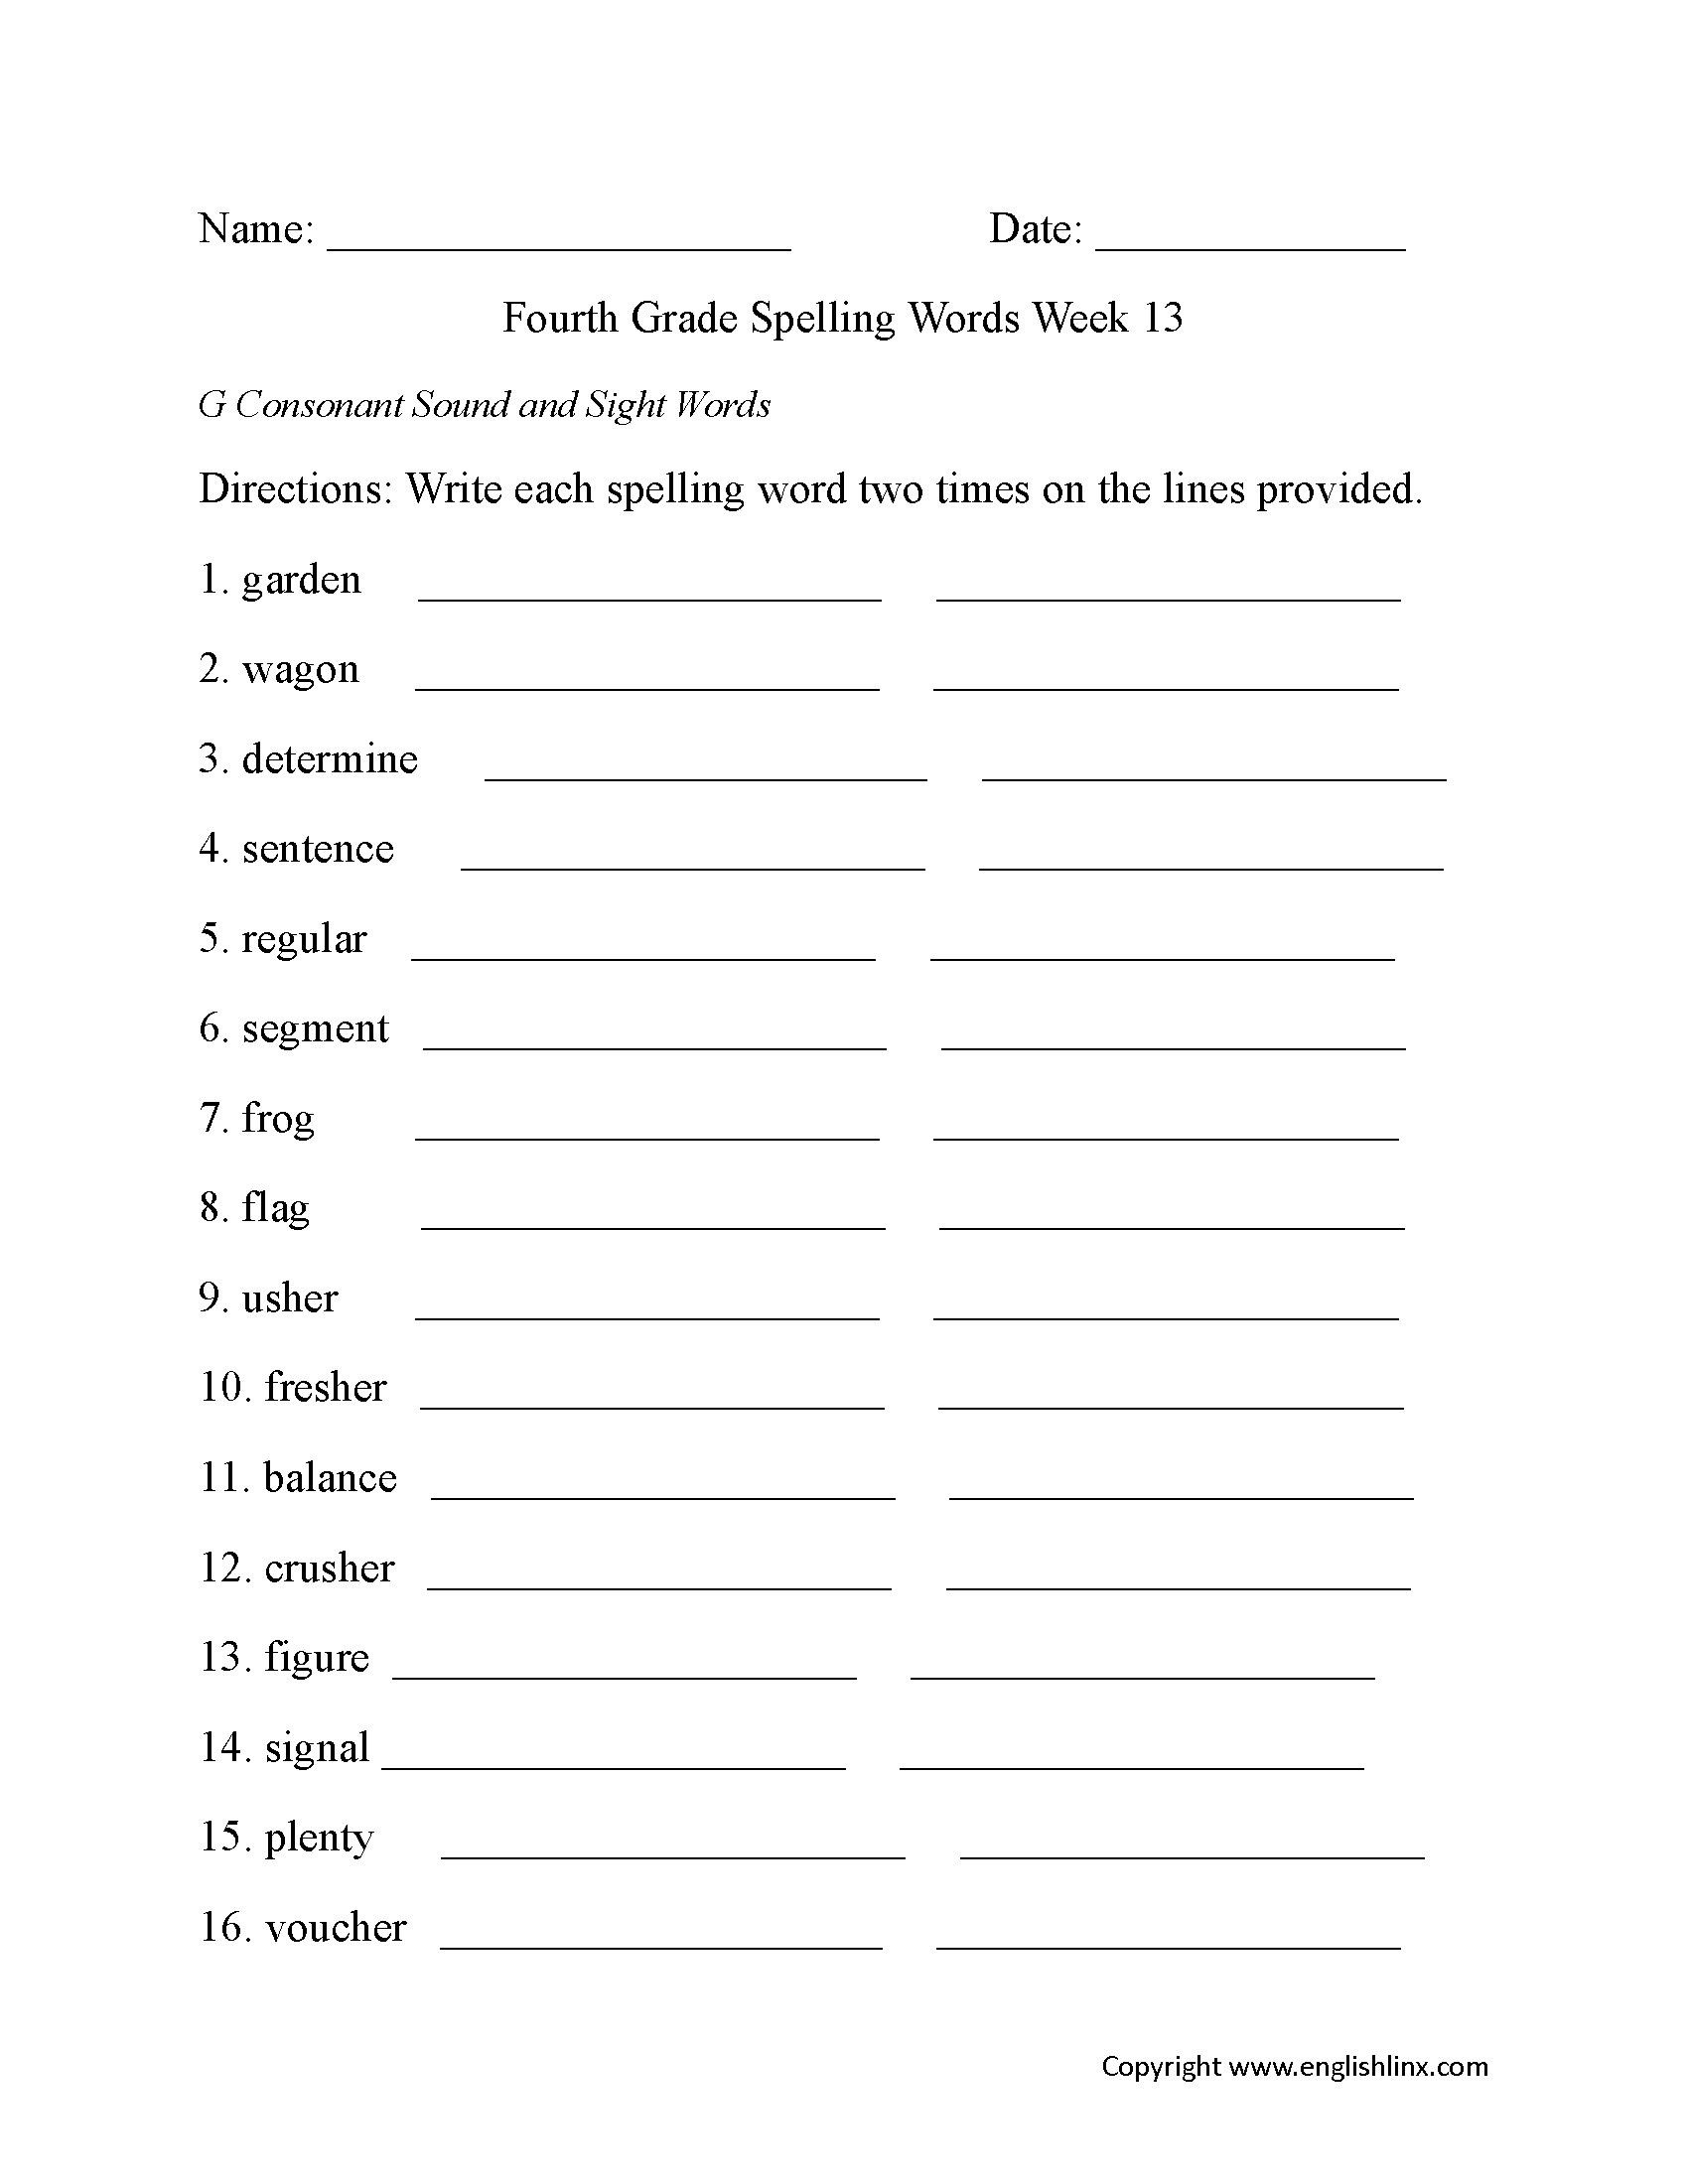 multiple-meaning-words-worksheets-5th-grade-db-excel